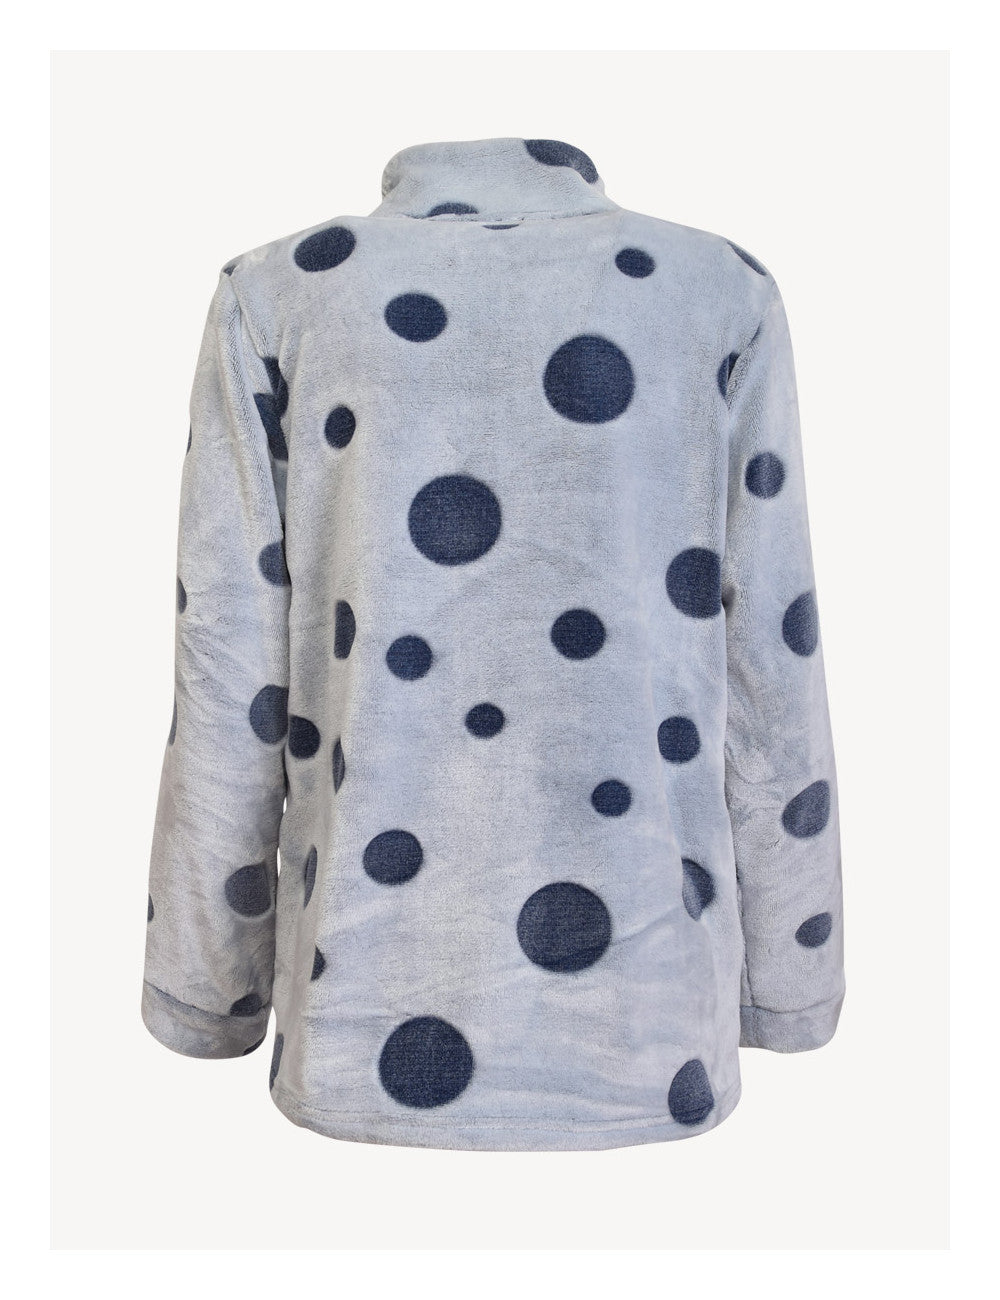 ack of the Long sleeve plush pajamas sweatshirt with bubble designed fabric by SIeLEI from Italy